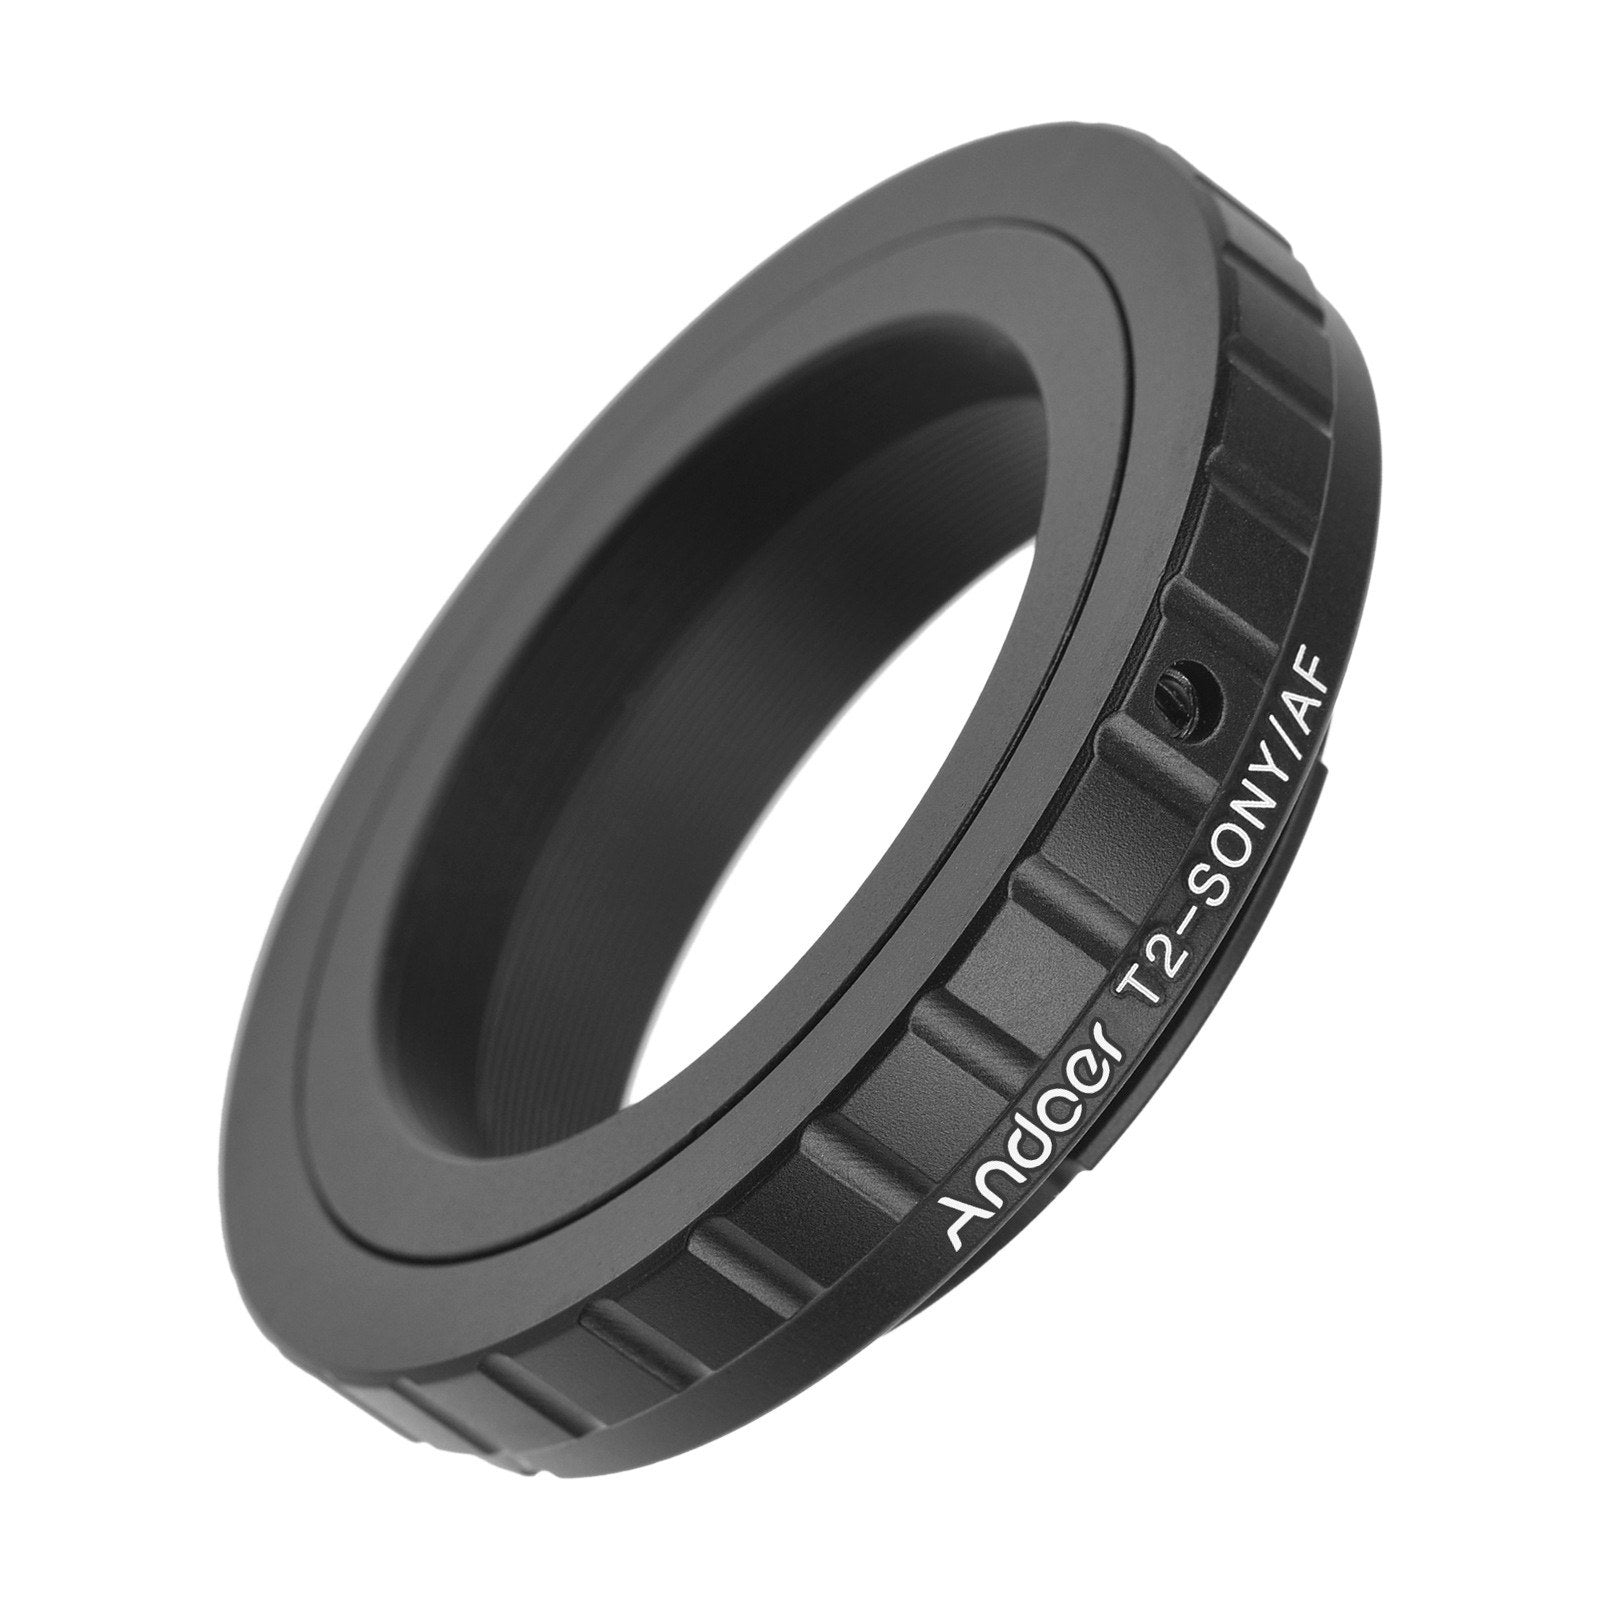 Andoer Tight Durable T2-AF Metal Lens Mount Adapter Ring T/T2 Mount Lens Adapter Replacement for Sony A100/A200/A230/A290/A300/A330/A350/A380/A390/A450/A500/A550/A560/A580/A700/A850/A900/A33/A37/A55/A57/A65/A77 Alpha Mount Cameras